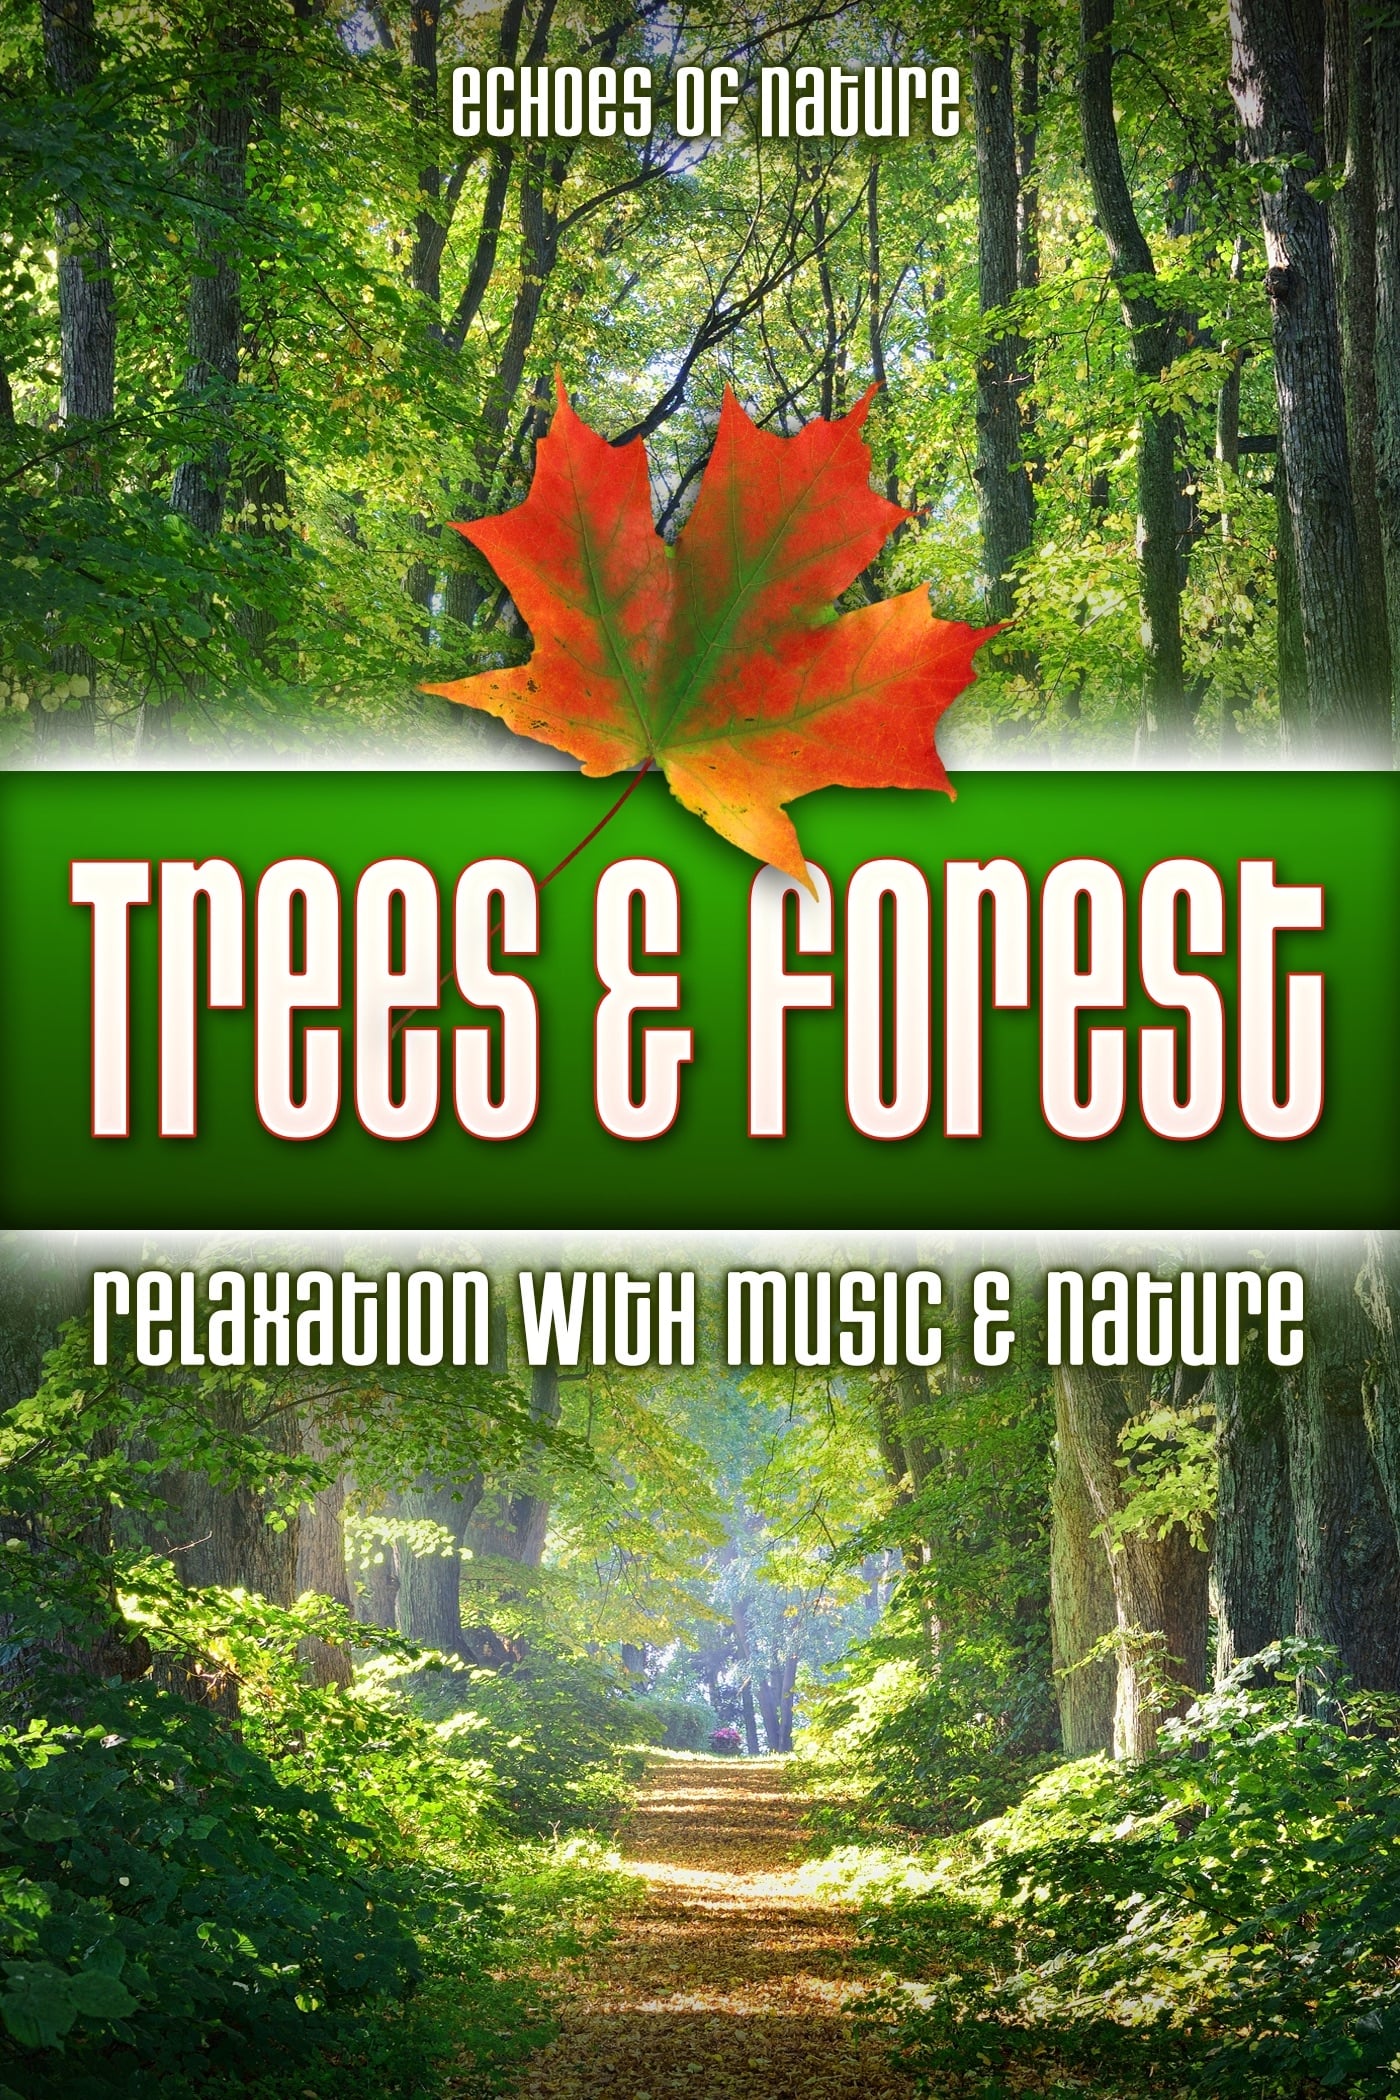 Trees & Forest: Echoes of Nature Relaxation with Music & Nature on FREECABLE TV